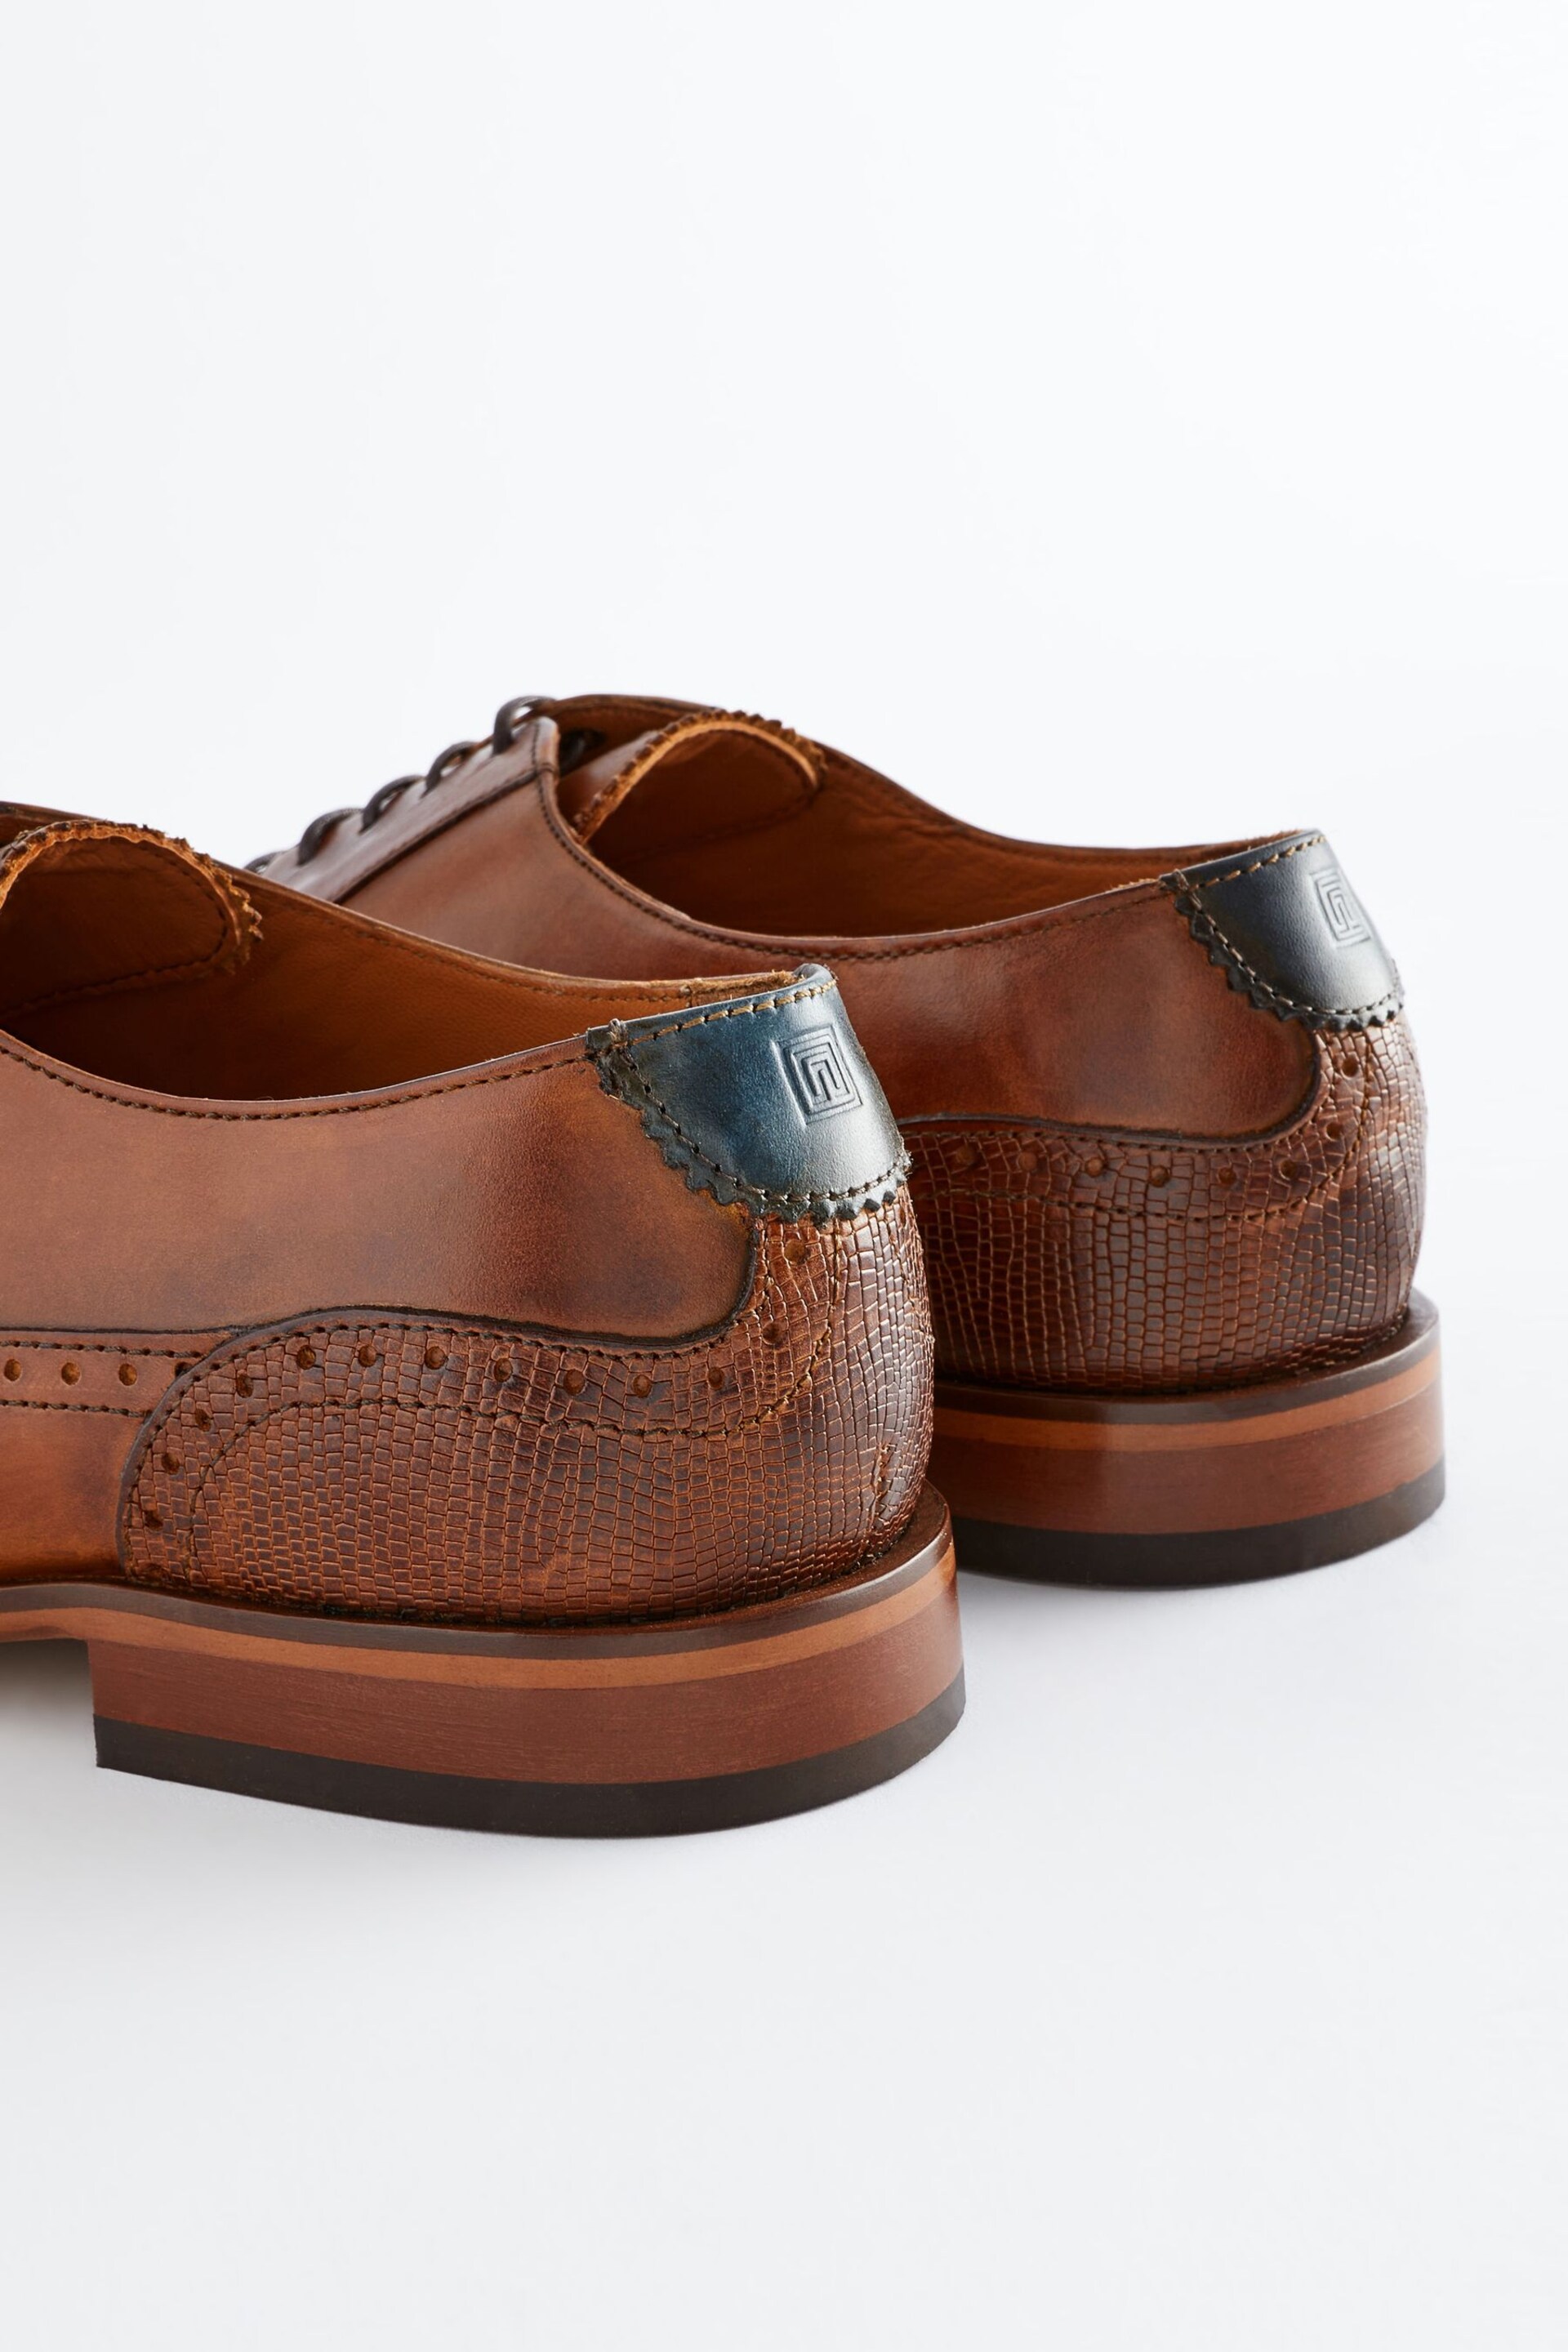 Dark Tan Brown Leather Oxford Wing Cap Brogue Shoes - Image 5 of 8